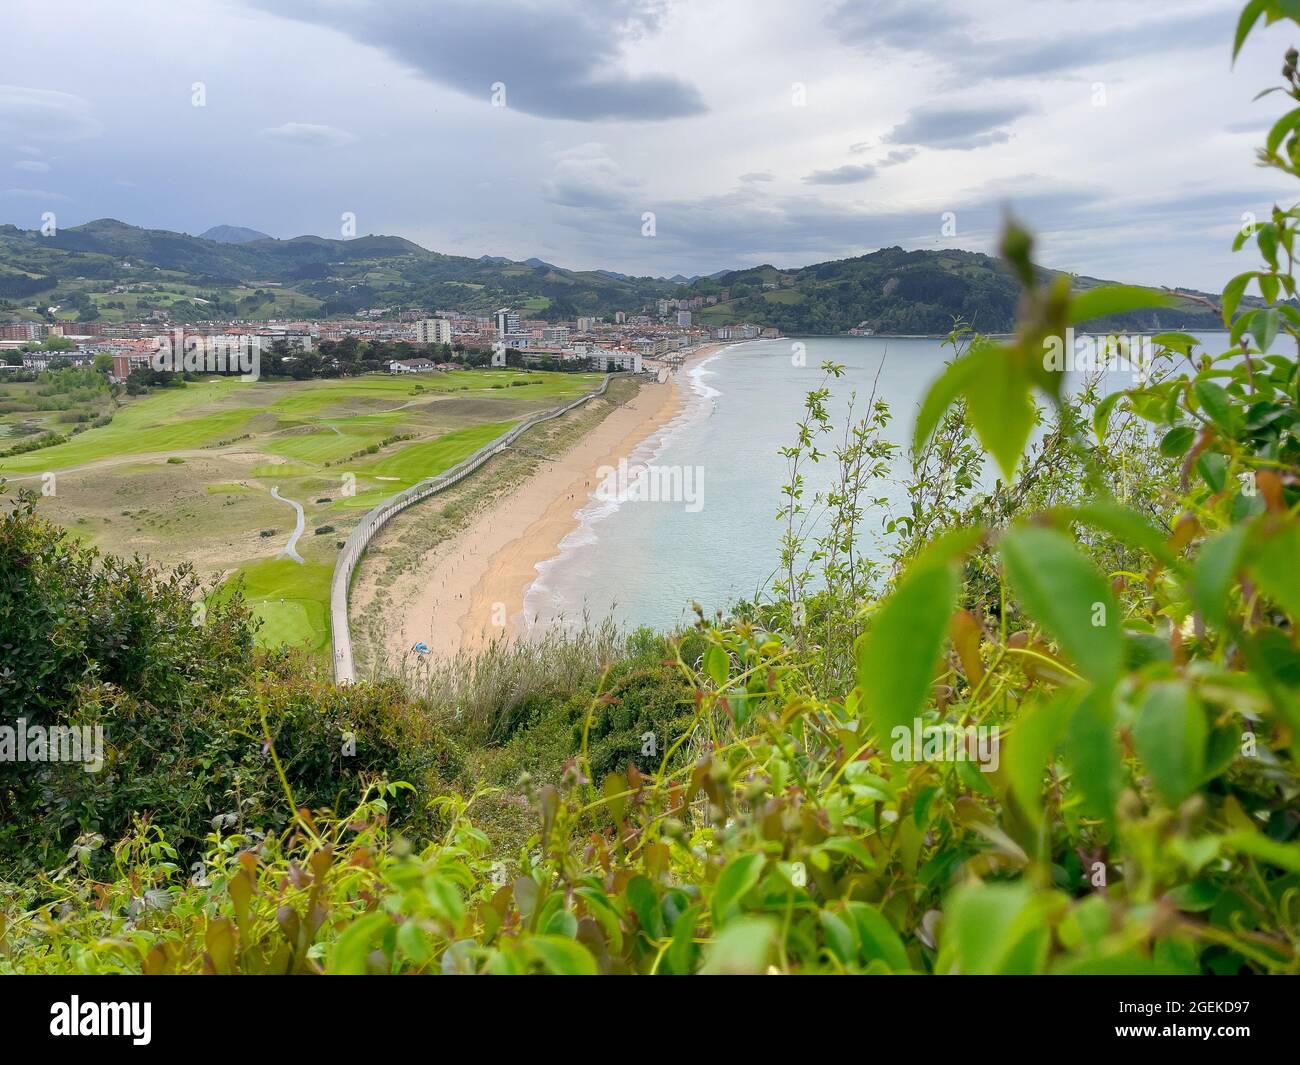 Panoramic view of the town of Zarautz and its beach. Stock Photo